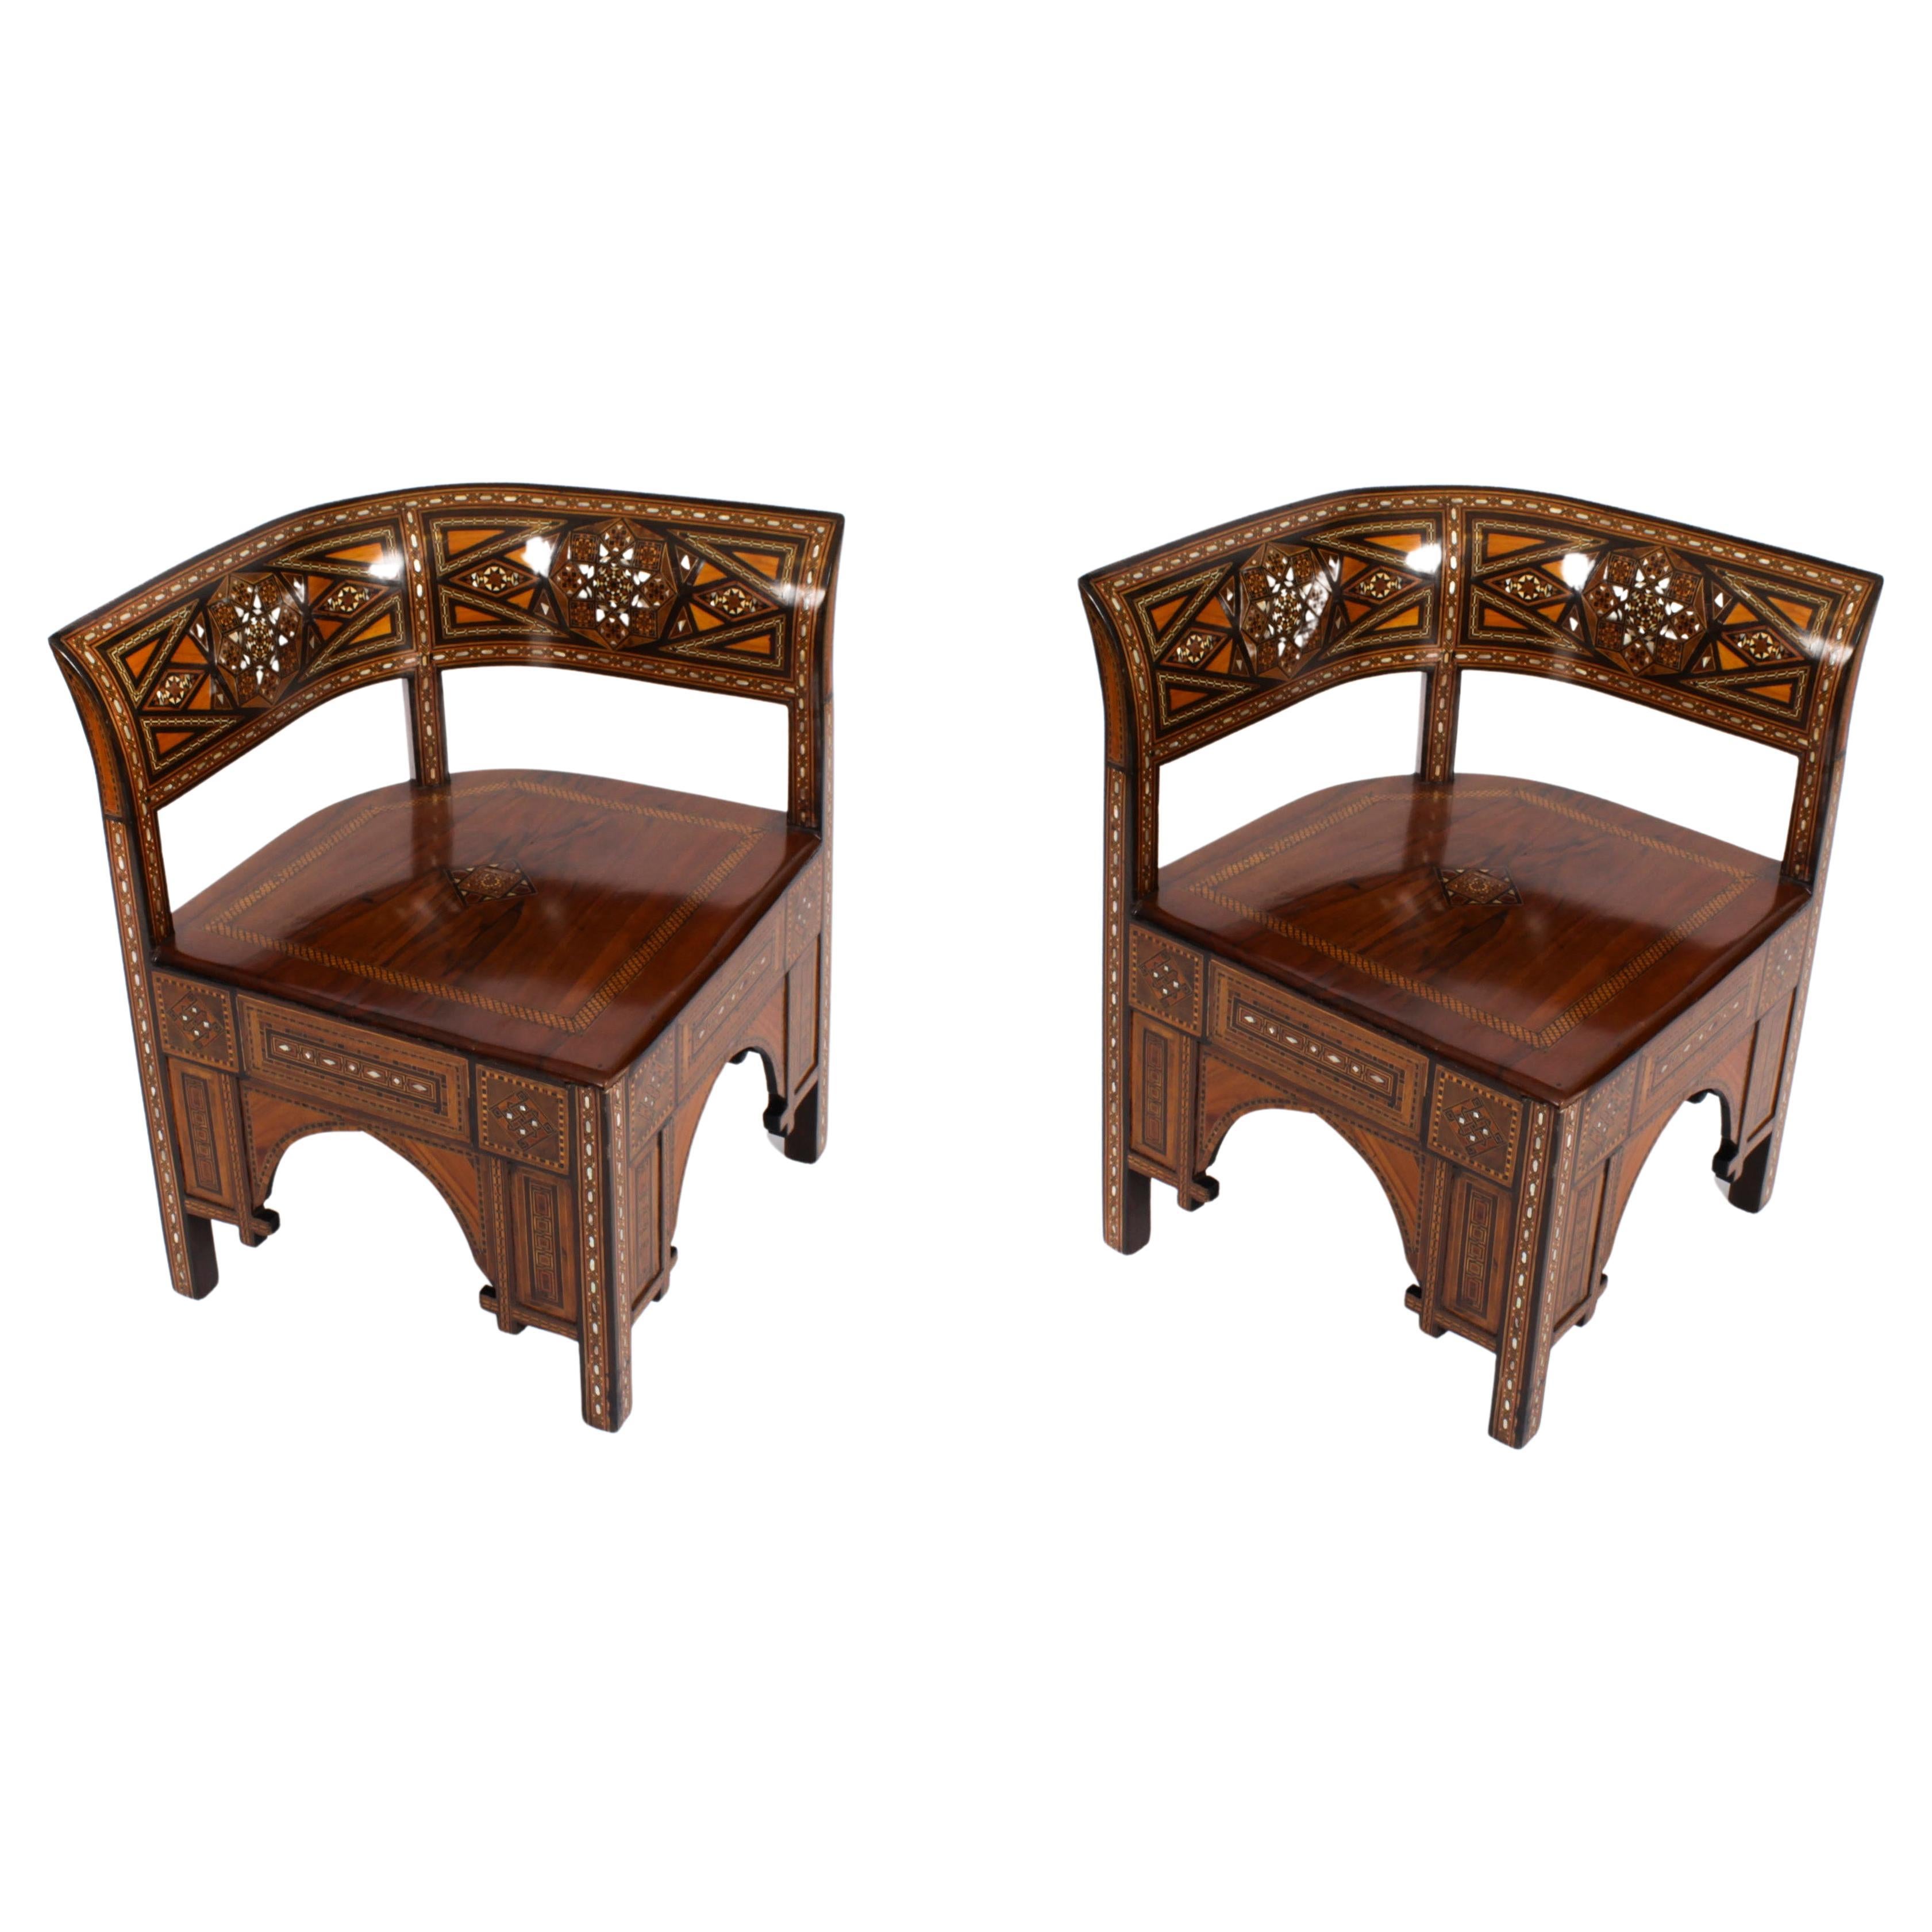 Antique Pair of Syrian Parquetry Inlaid Armchairs C1900 For Sale